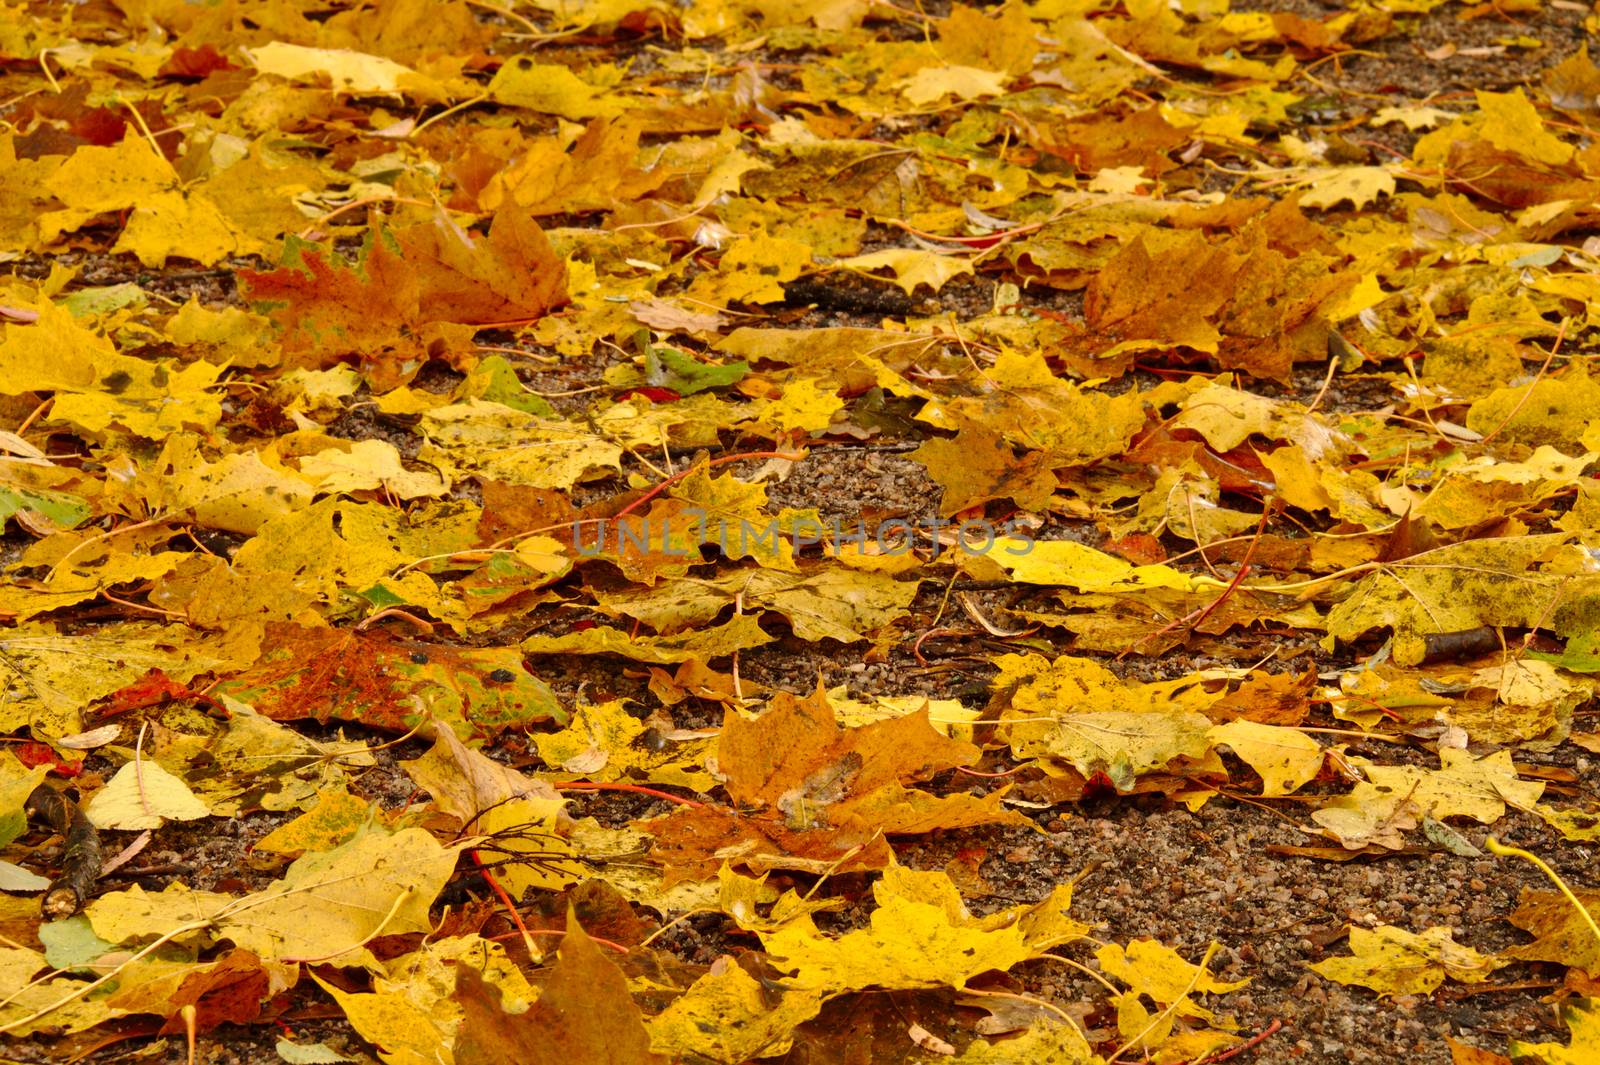 Fallen maple leaves in the park in october.